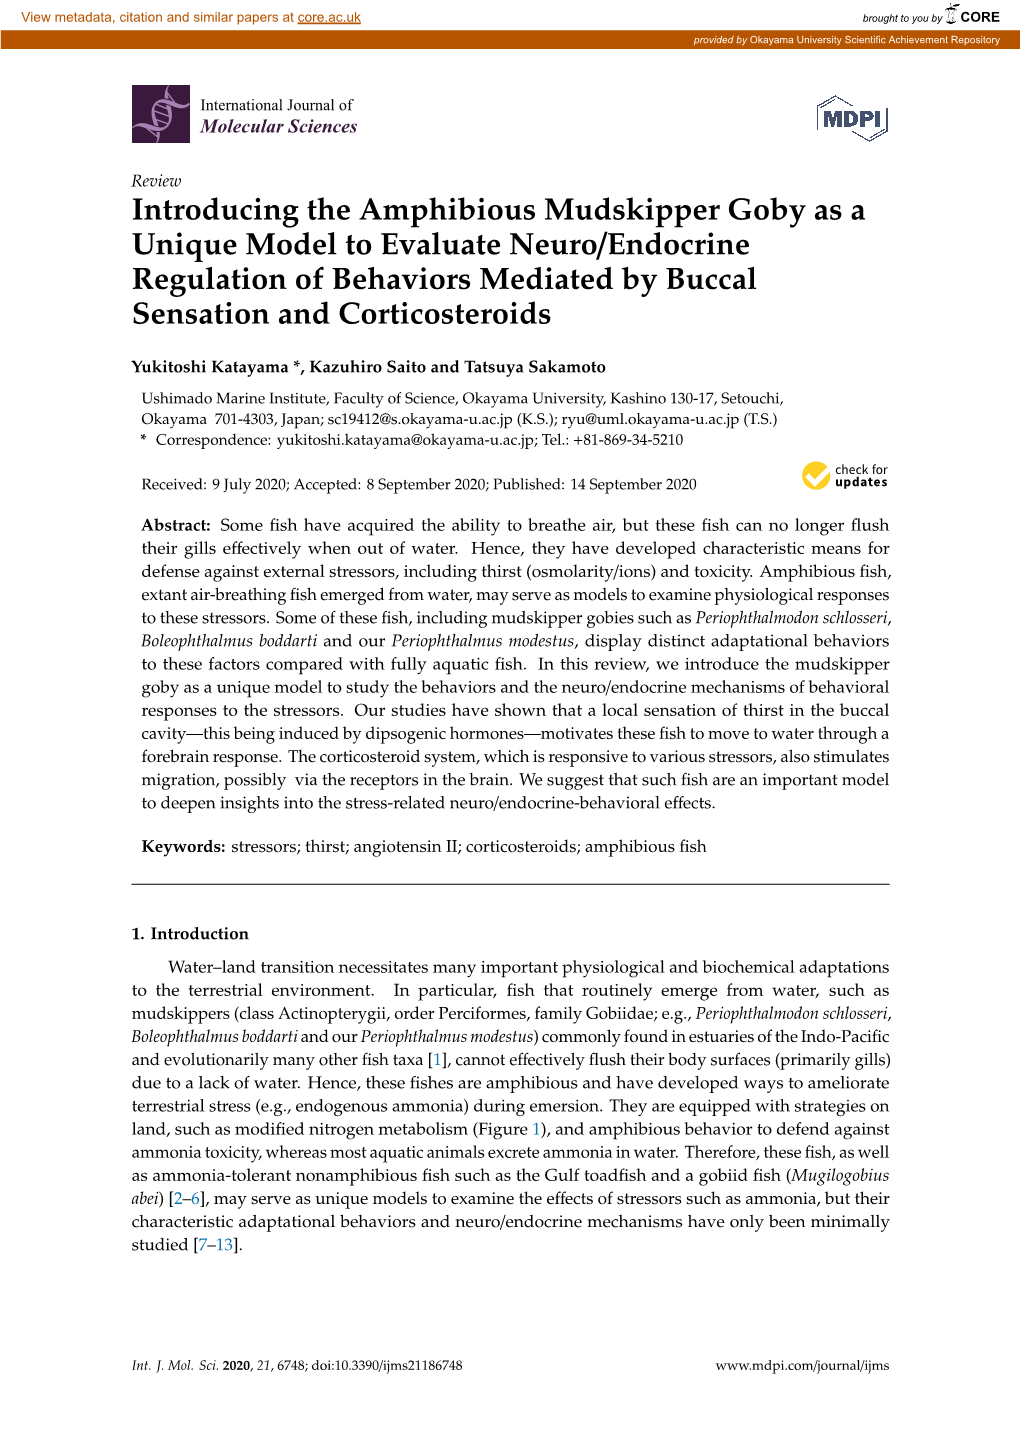 Introducing the Amphibious Mudskipper Goby As a Unique Model to Evaluate Neuro/Endocrine Regulation of Behaviors Mediated by Buccal Sensation and Corticosteroids